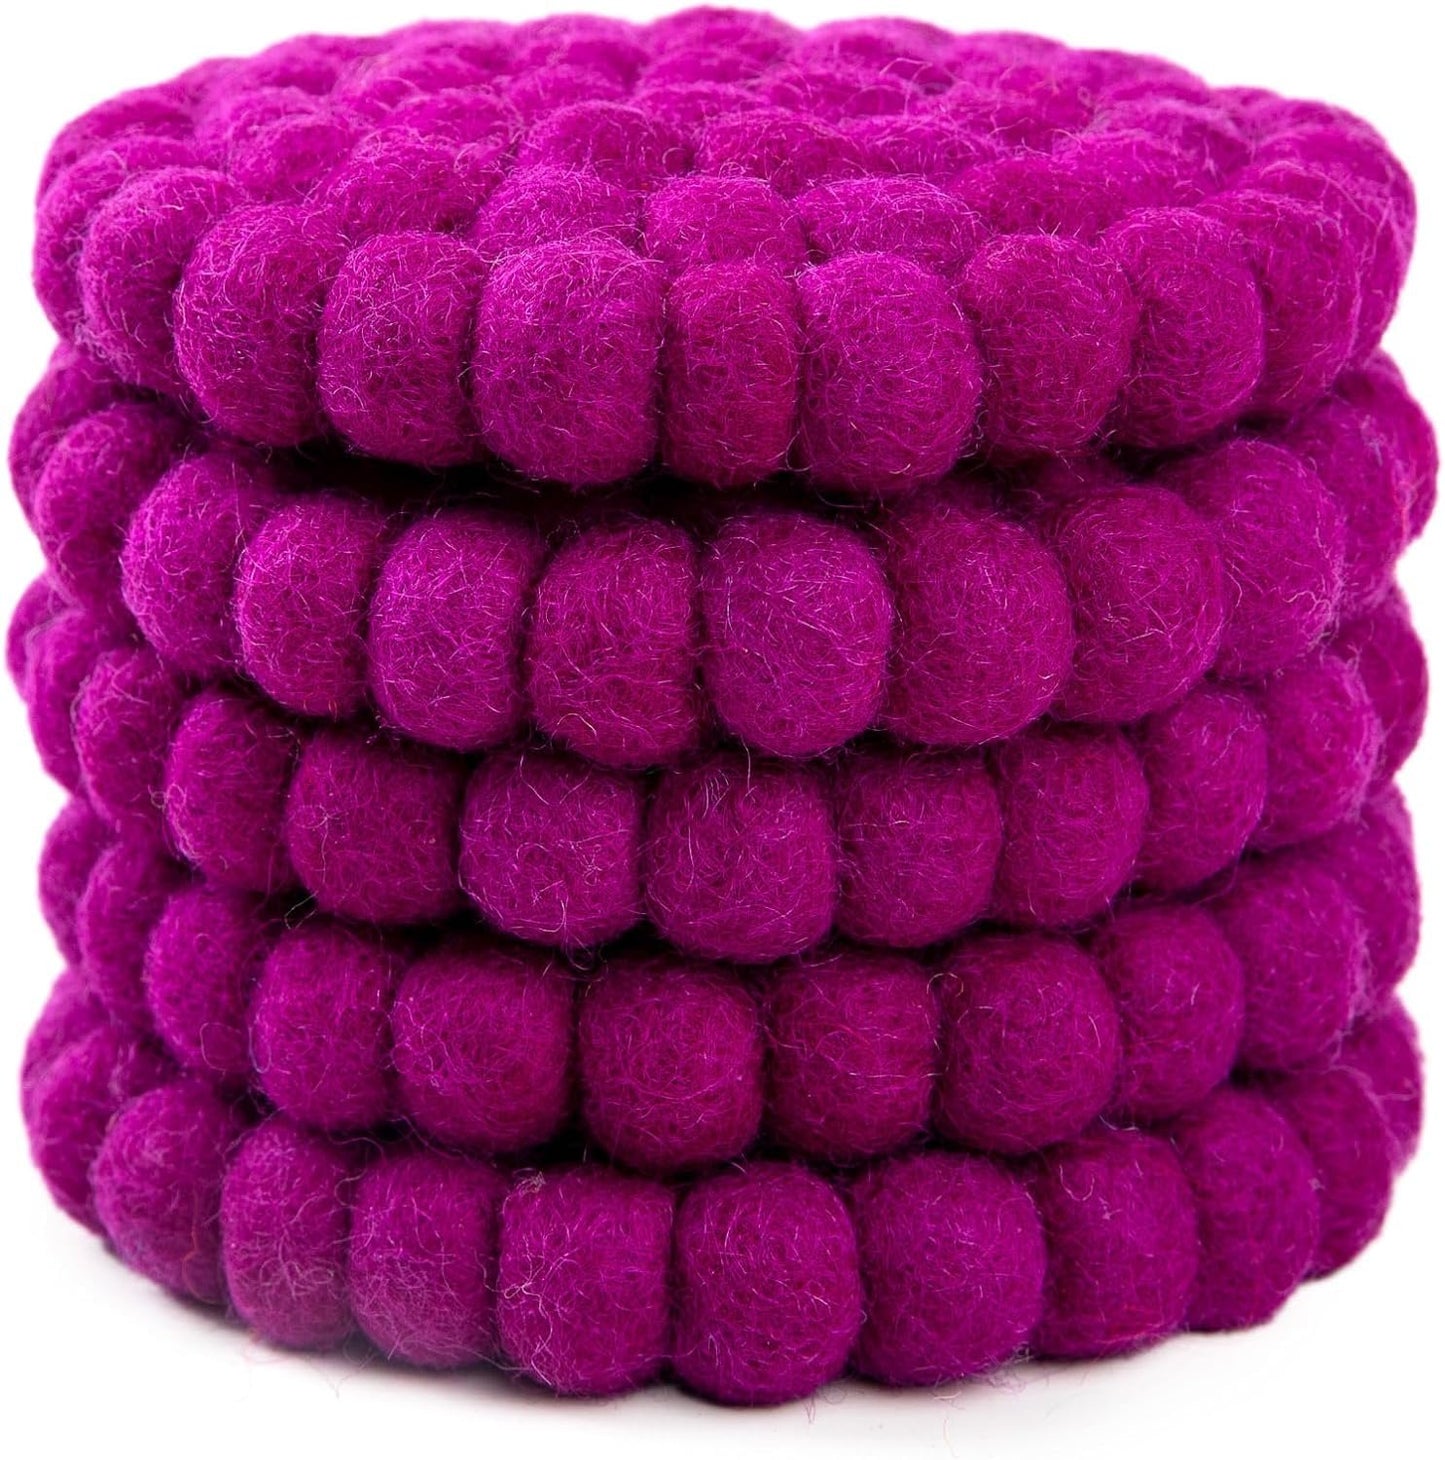 Round Felt Ball Coasters - 100% Merino Wool Table Coasters - Felt Coaster Pads, Absorbent Trivet for Drinks - Heat Resistant, Thick & Durable Hand Felted in Nepal by Woolygon- Multicolor - Set of 5